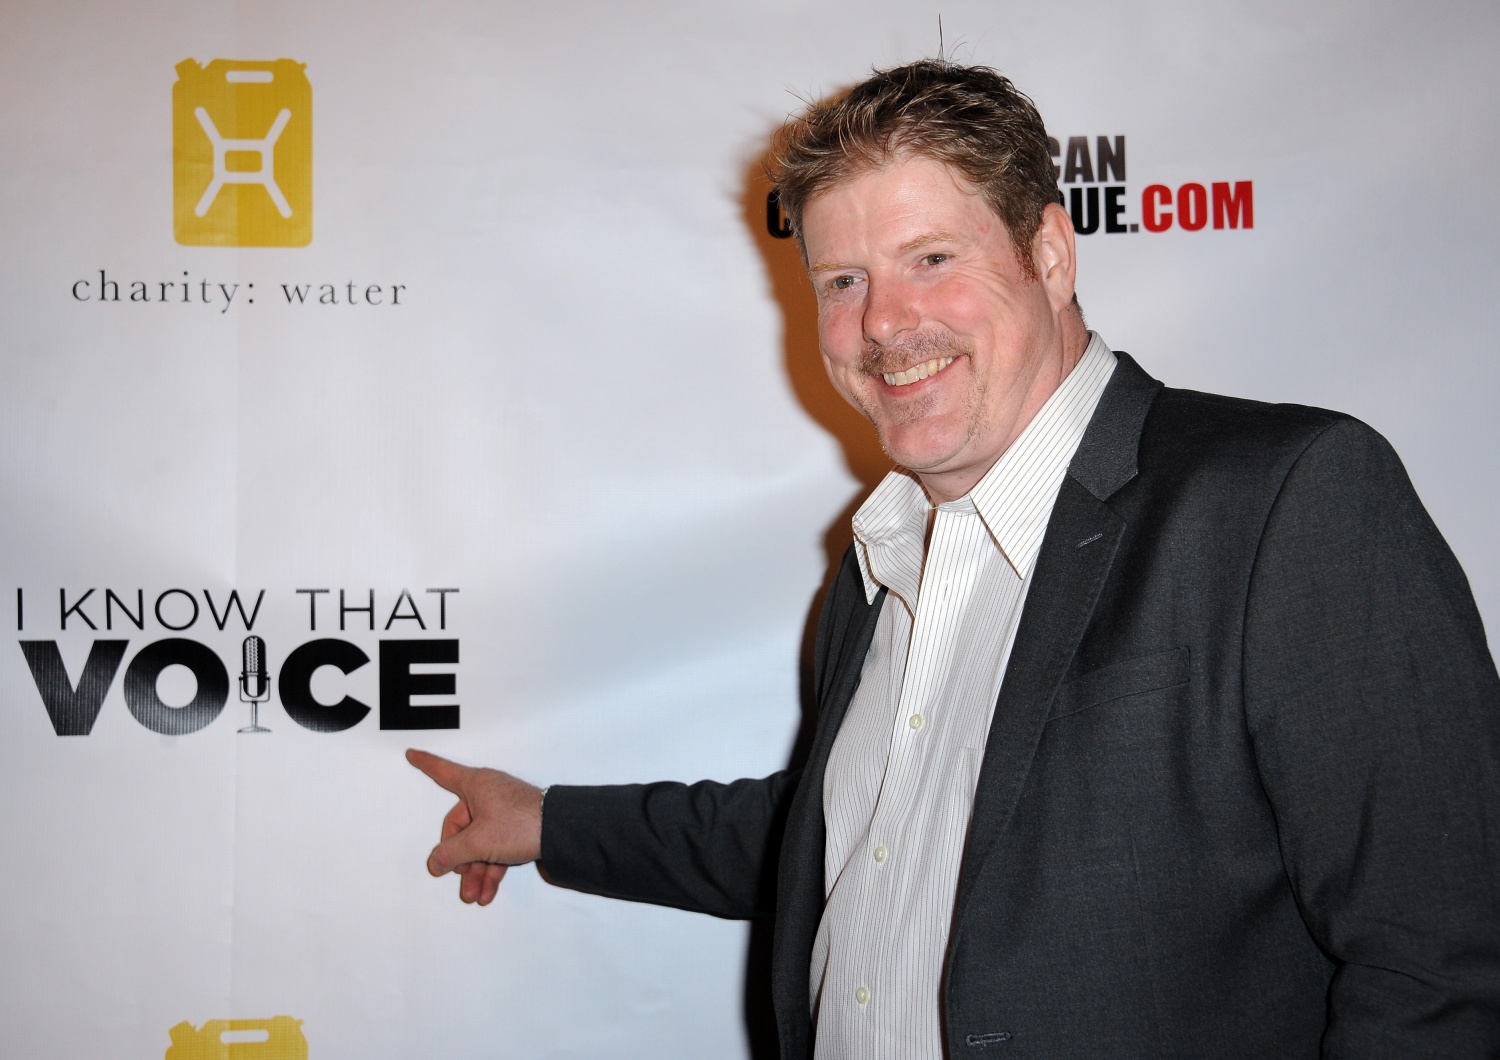 Voiceover Actor/Executive Producer John DiMaggio arrives for the Premiere Of "I Know That Voice" held at American Cinematheque's Egyptian Theatre on November 6, 2013 in Hollywood, California. (Photo by Albert L. Ortega/Getty Images)